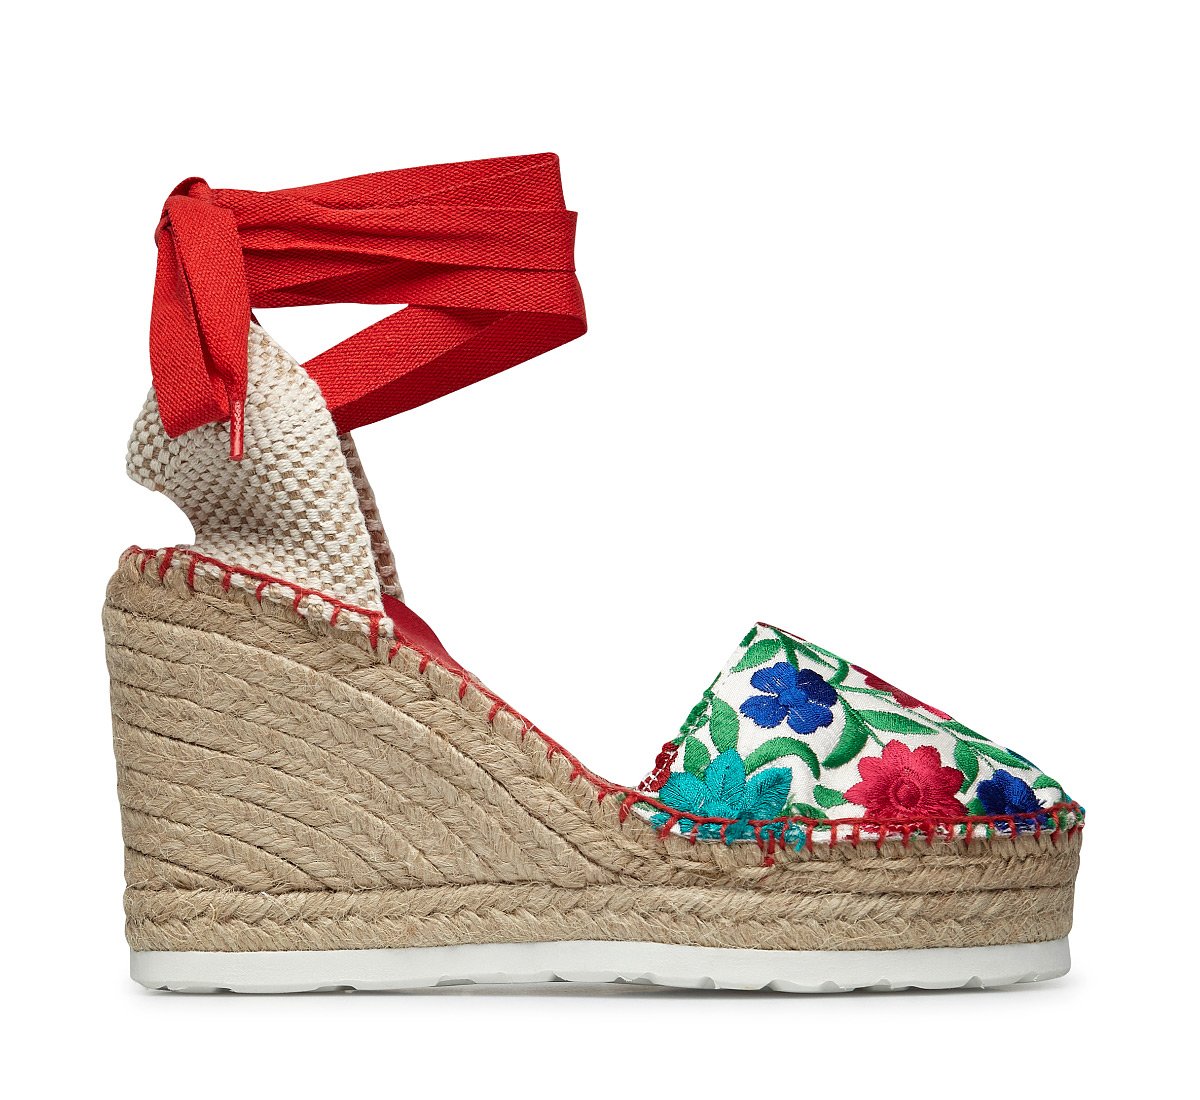 Espadrilles with wedge and floral print